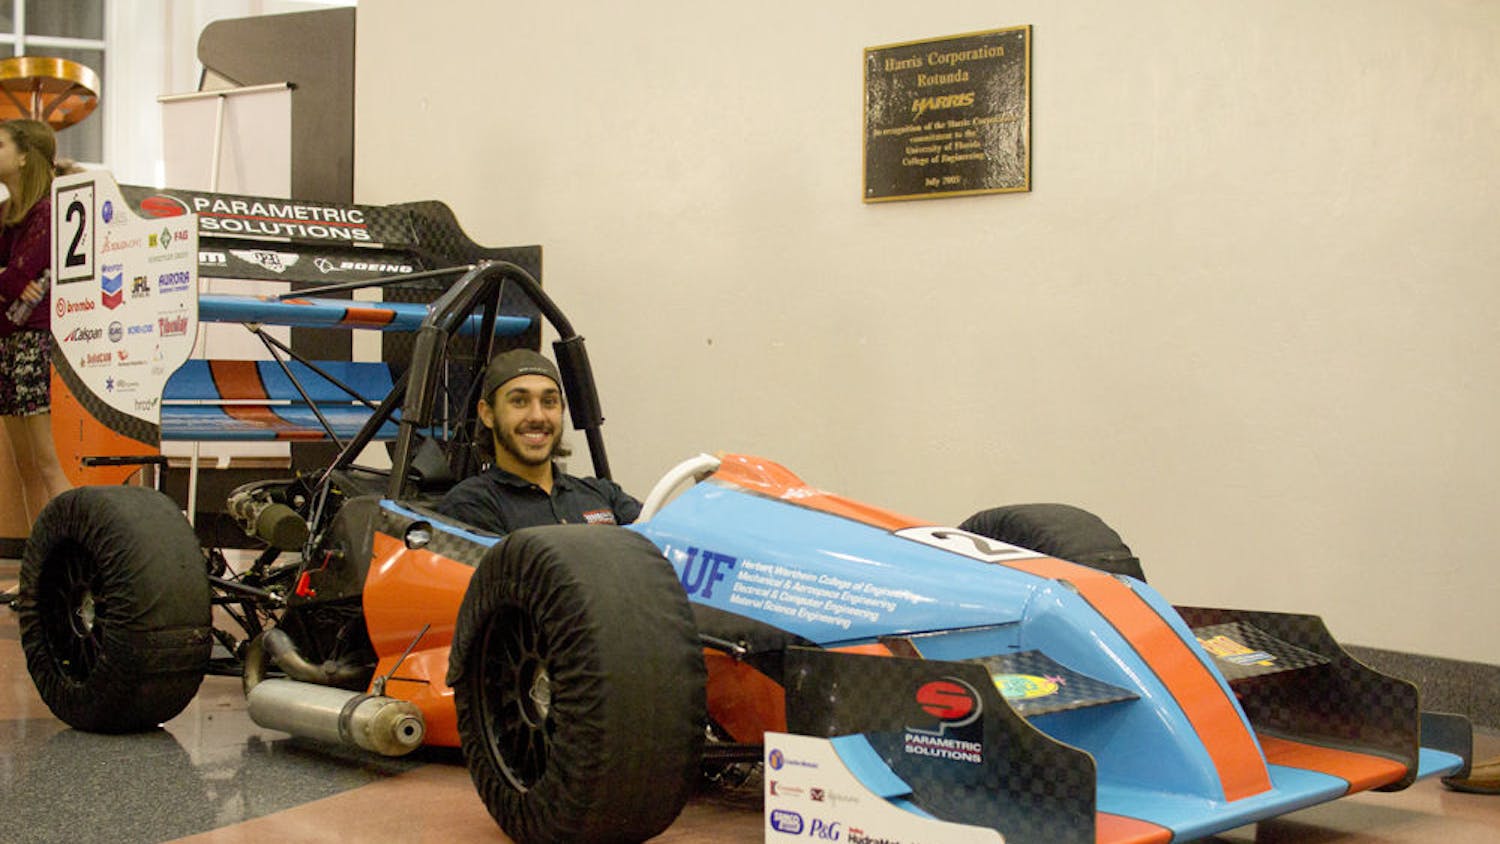 Gator Motorsports project manager David Kanner poses for a photo inside Gator Motorsports’ $90,000 Formula-style racecar, which will compete in at the Formula Society of Automotive Engineers Competition at the Michigan International Speedway in May.